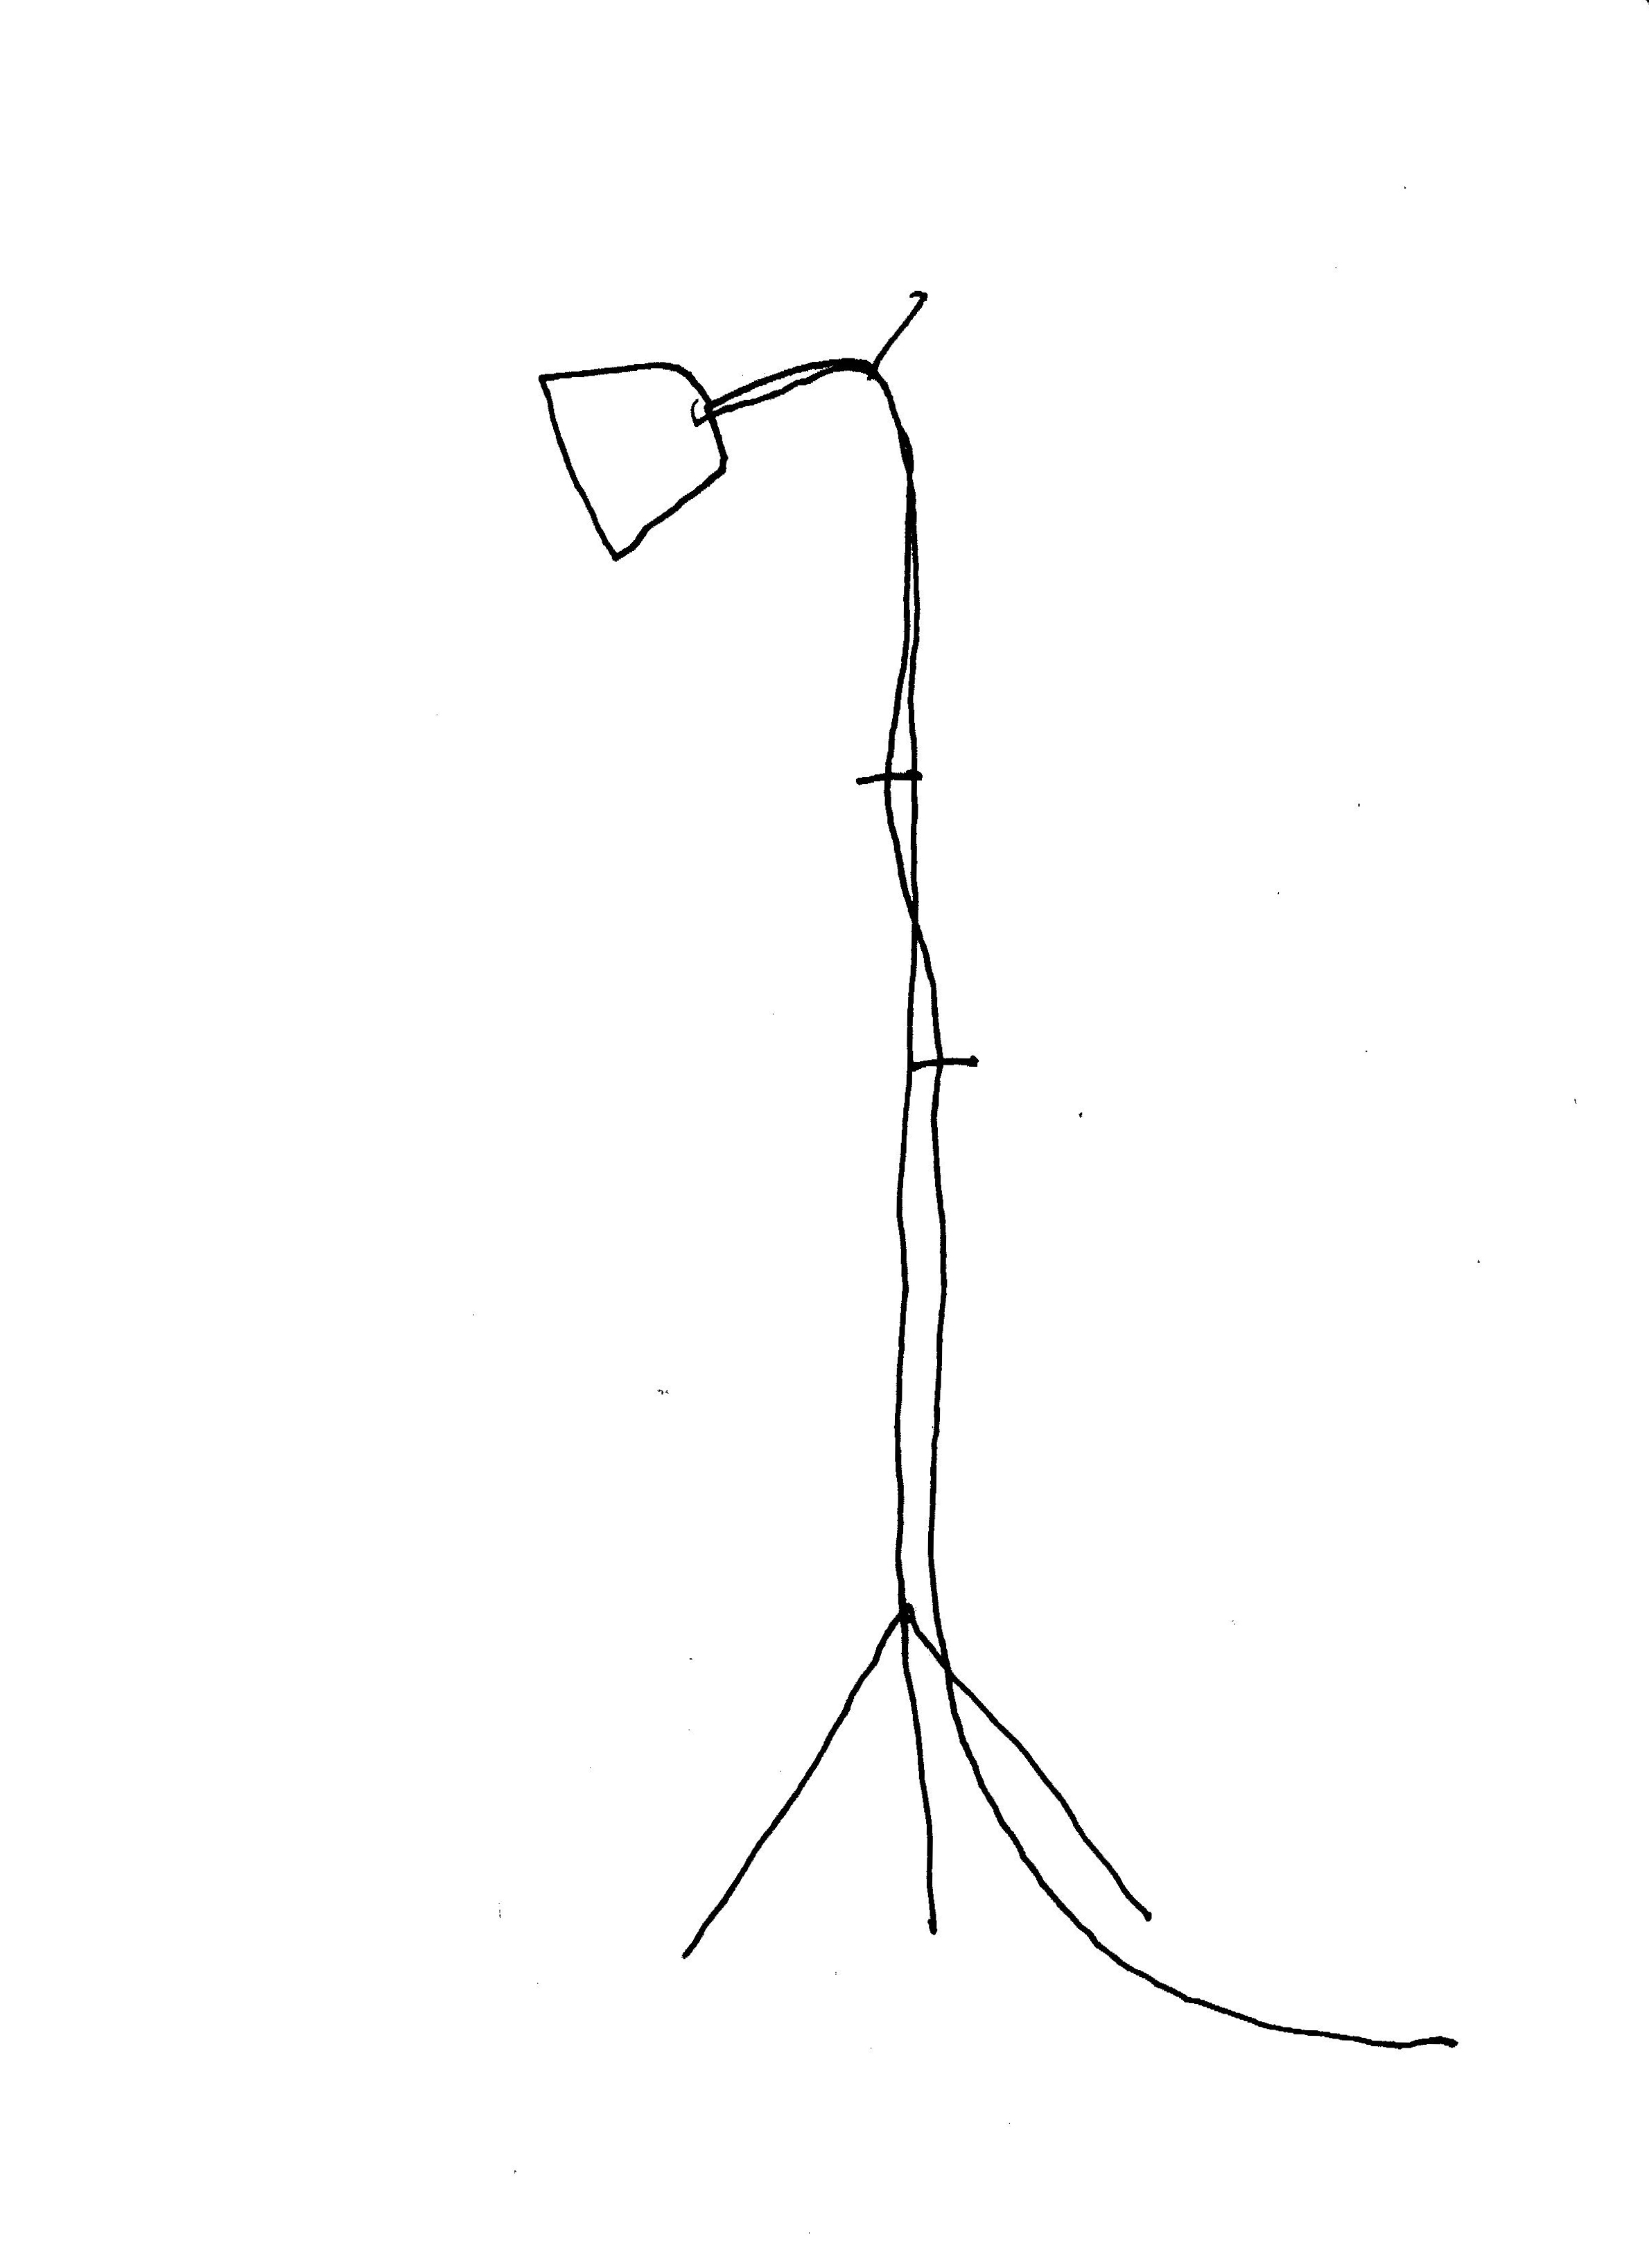 pen drawing of a lamp with a cord running off to the right